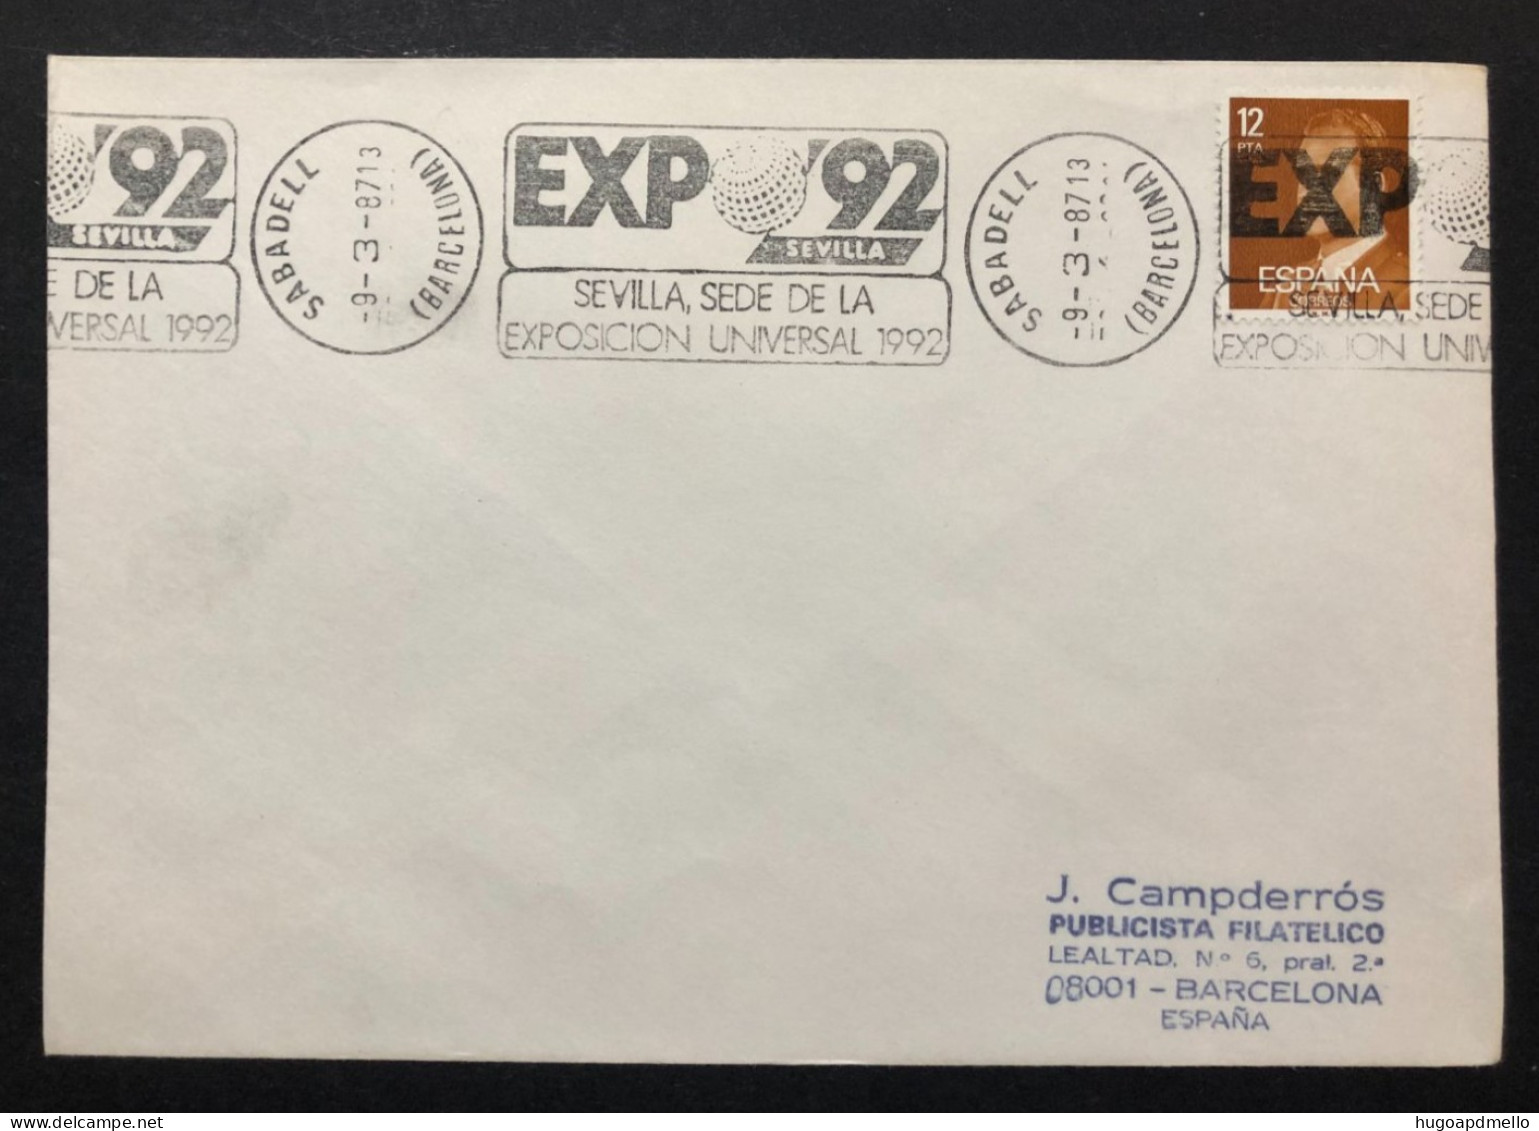 SPAIN, Cover With Special Cancellation « EXPO '92 », « SABADELL (Barcelona) Postmark », 1987 - 1992 – Sevilla (Spain)